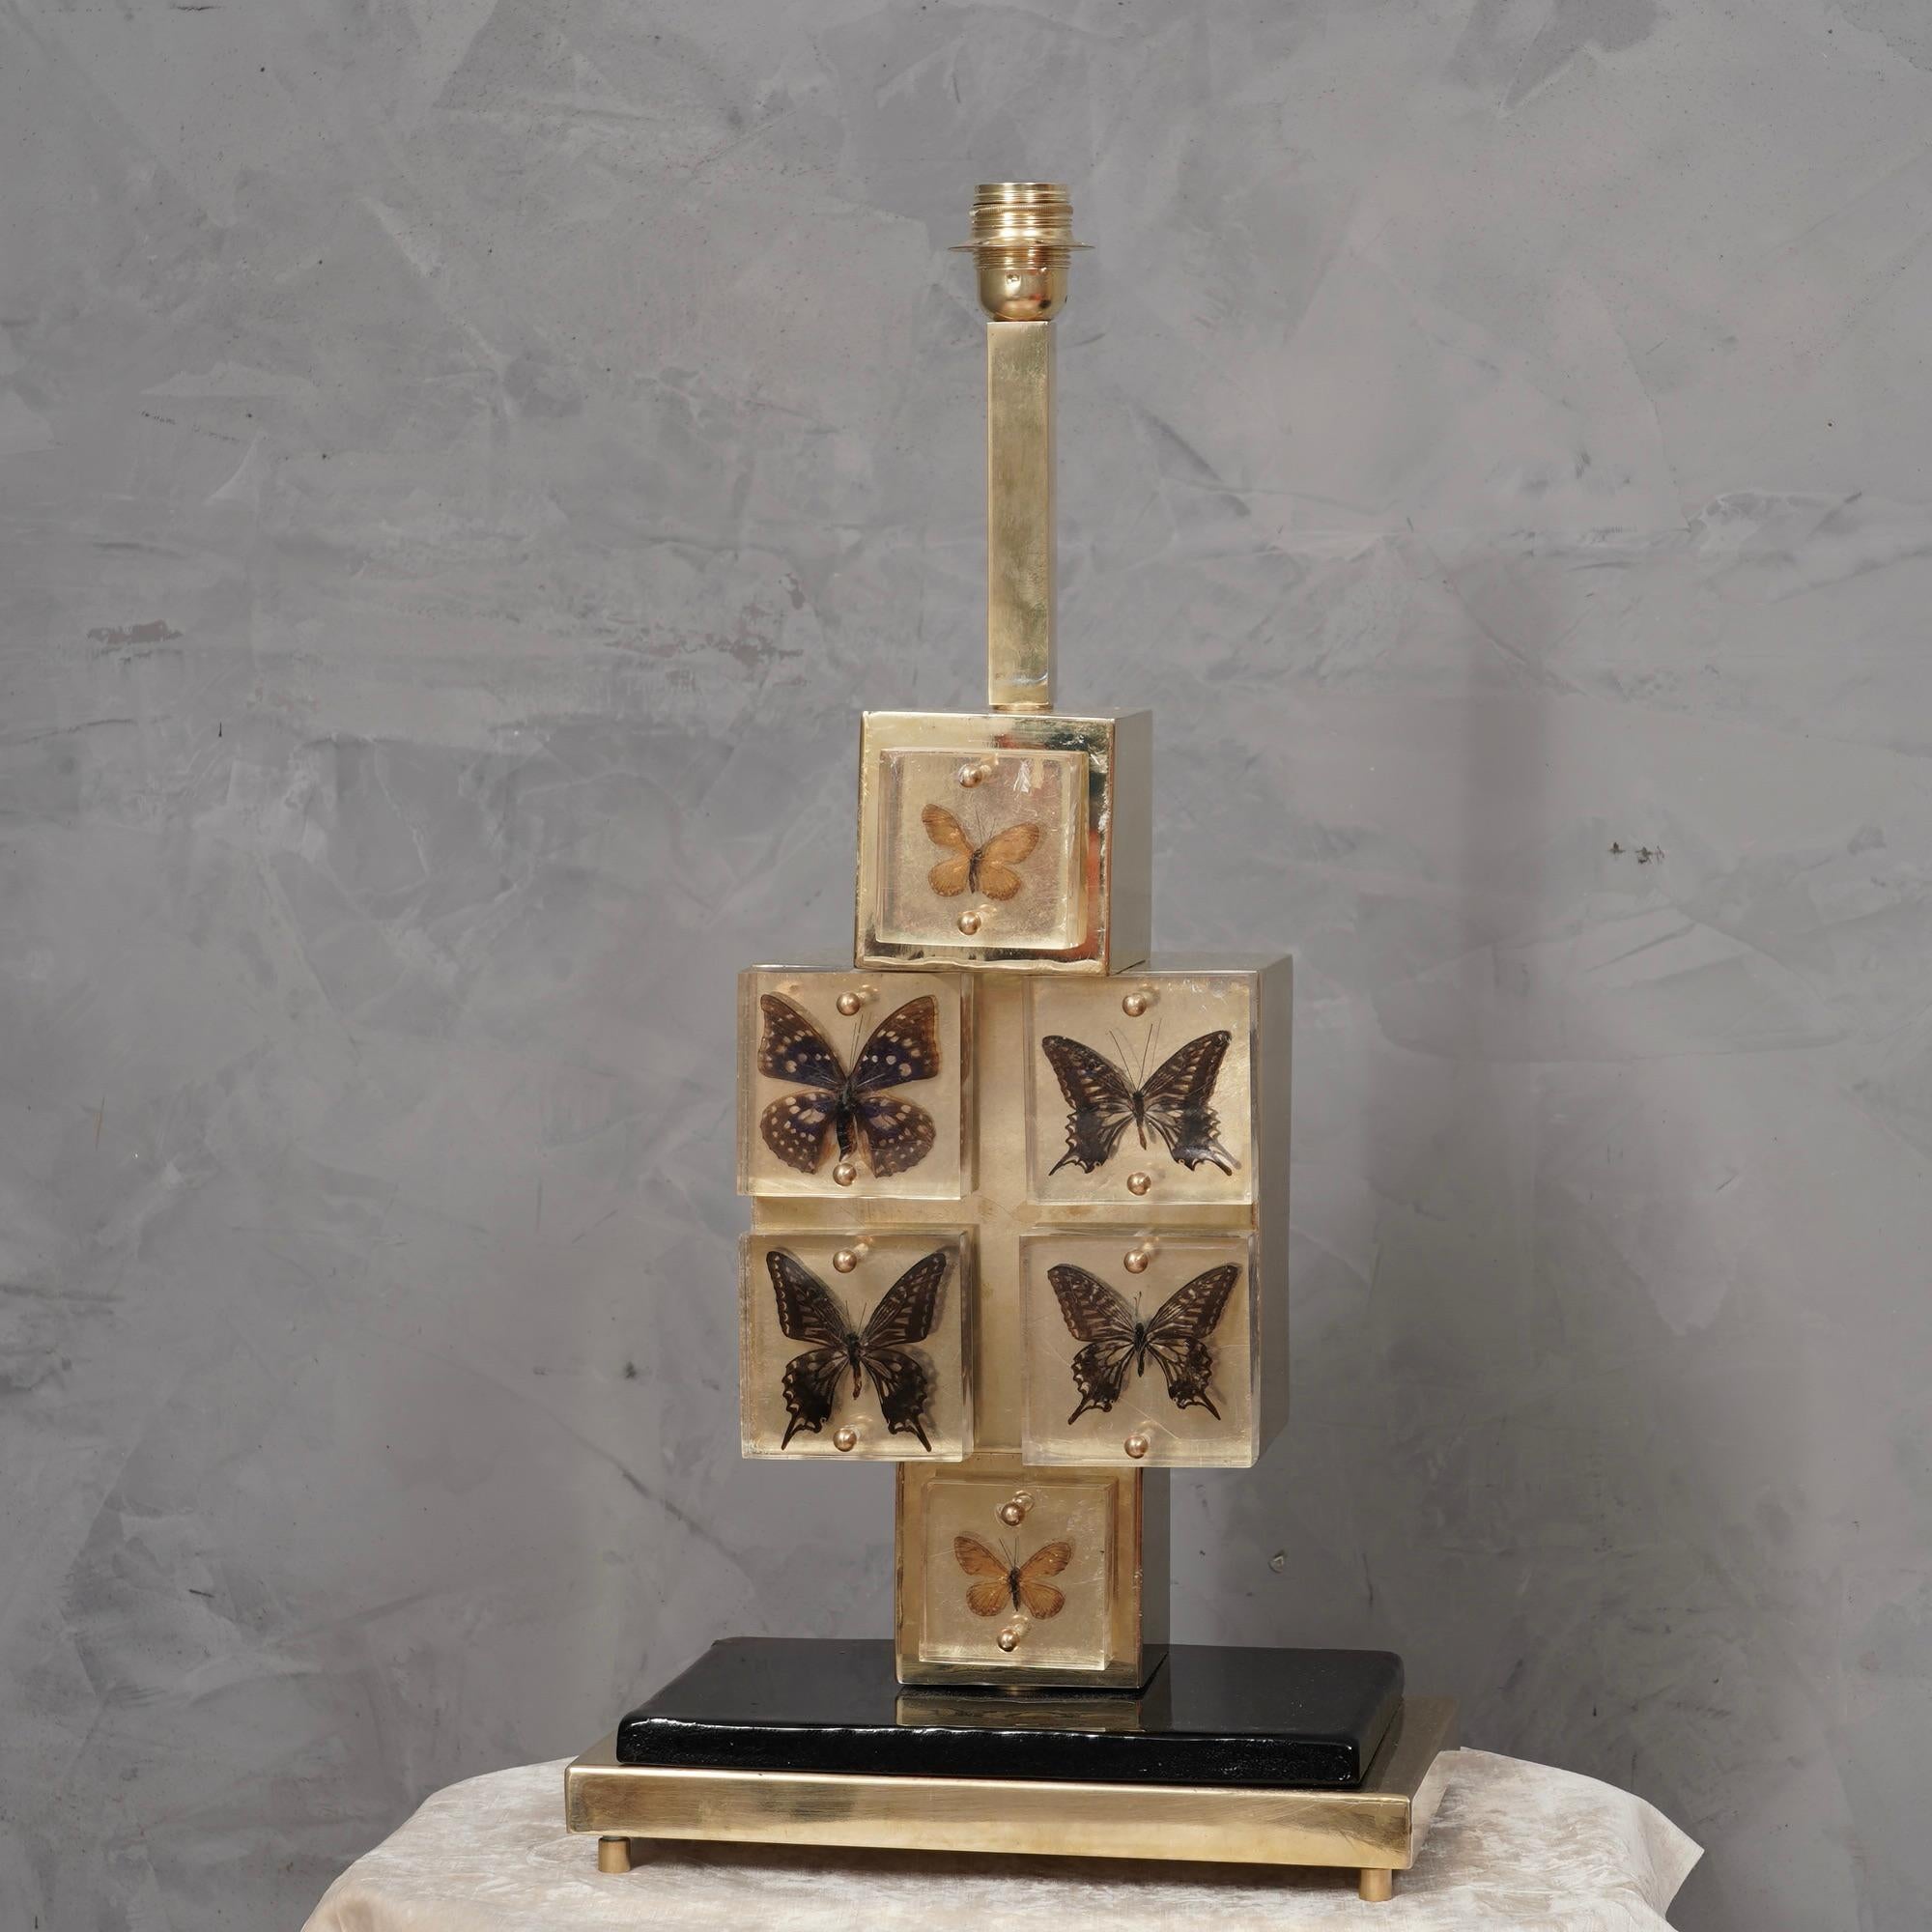 Original and characteristic table lamps in  resin and brass. One of a kind design, designed and made especially for our HannauRoma Store.

The lamp is composed of a brass structure on which resin cubes have been positioned in which butterflies have